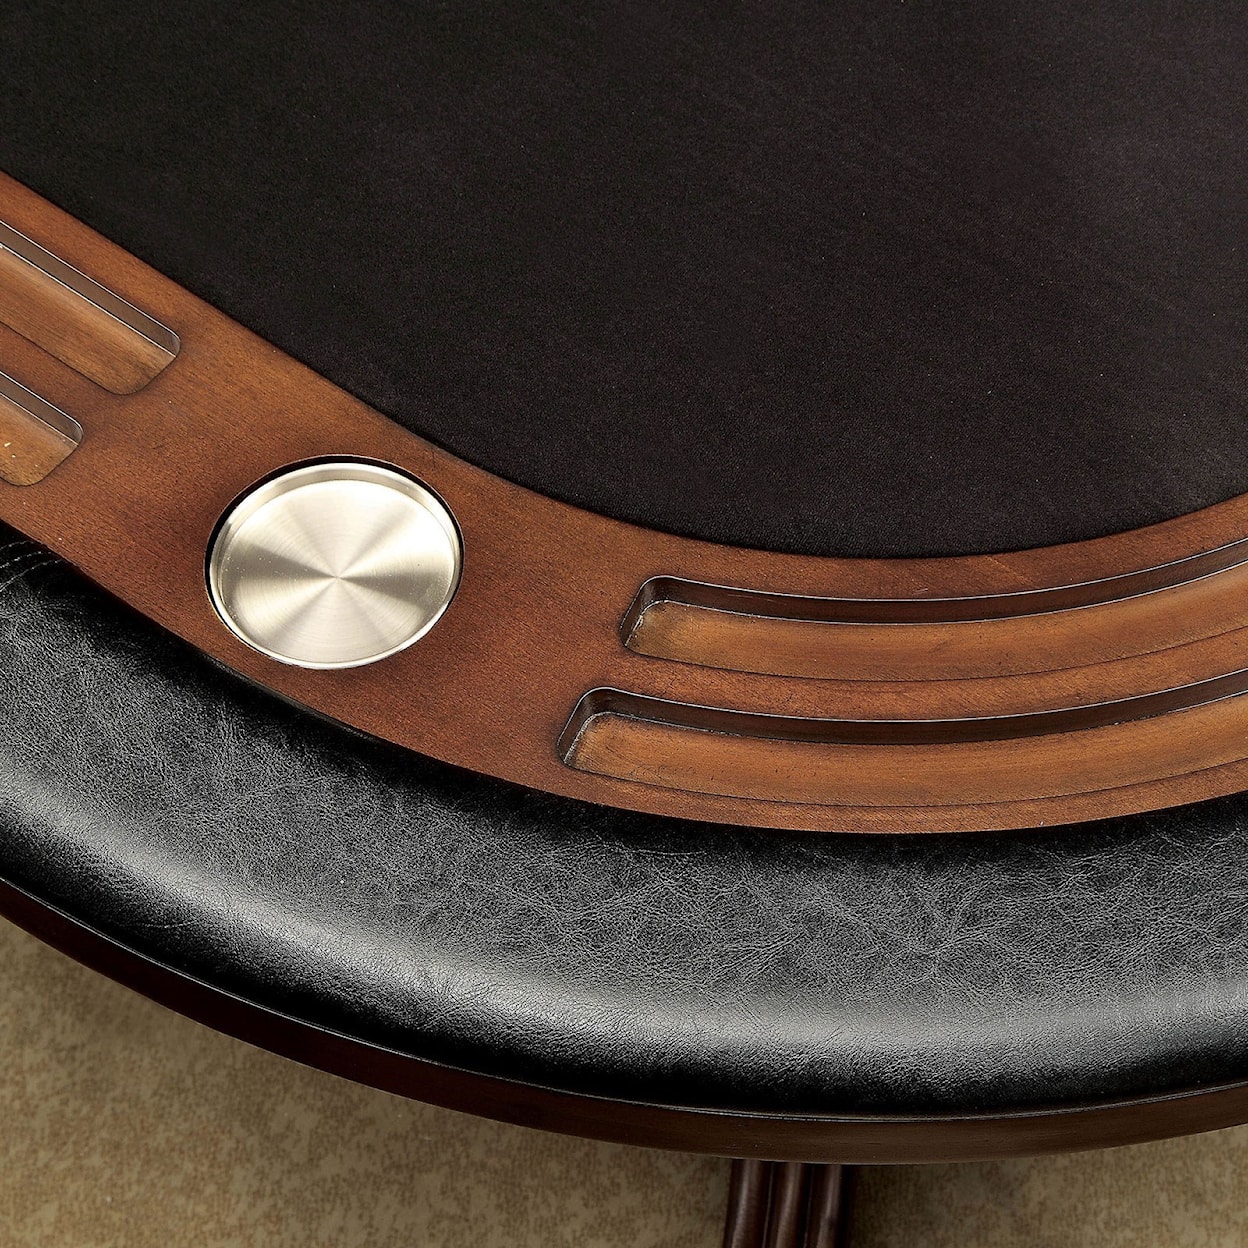 Furniture of America Melina Game Table